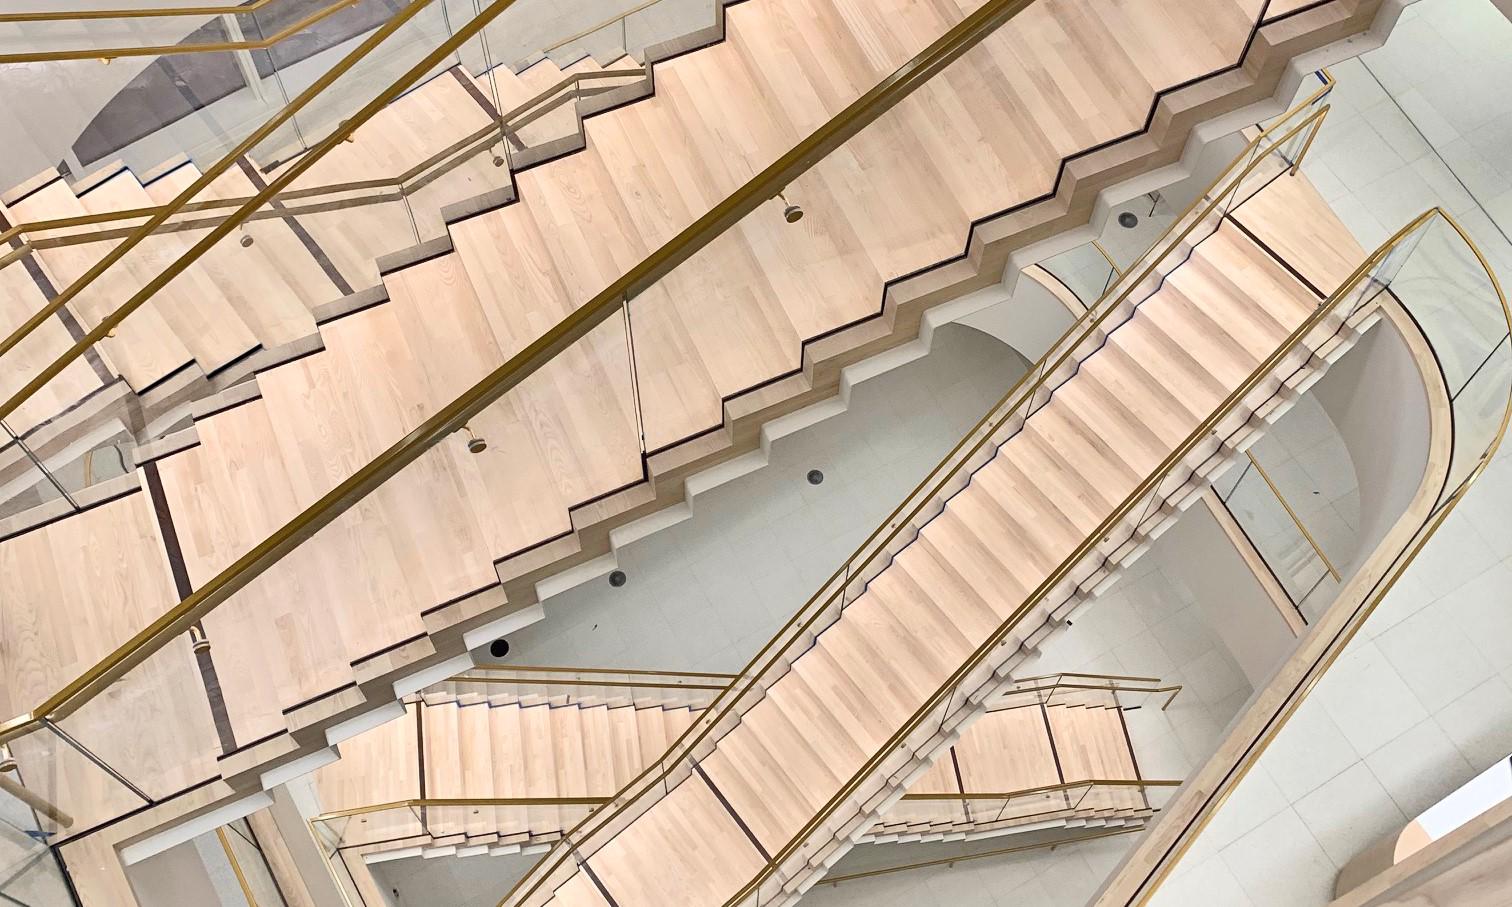 Glass Railings - Stairway at Accenture Salesforce Tower